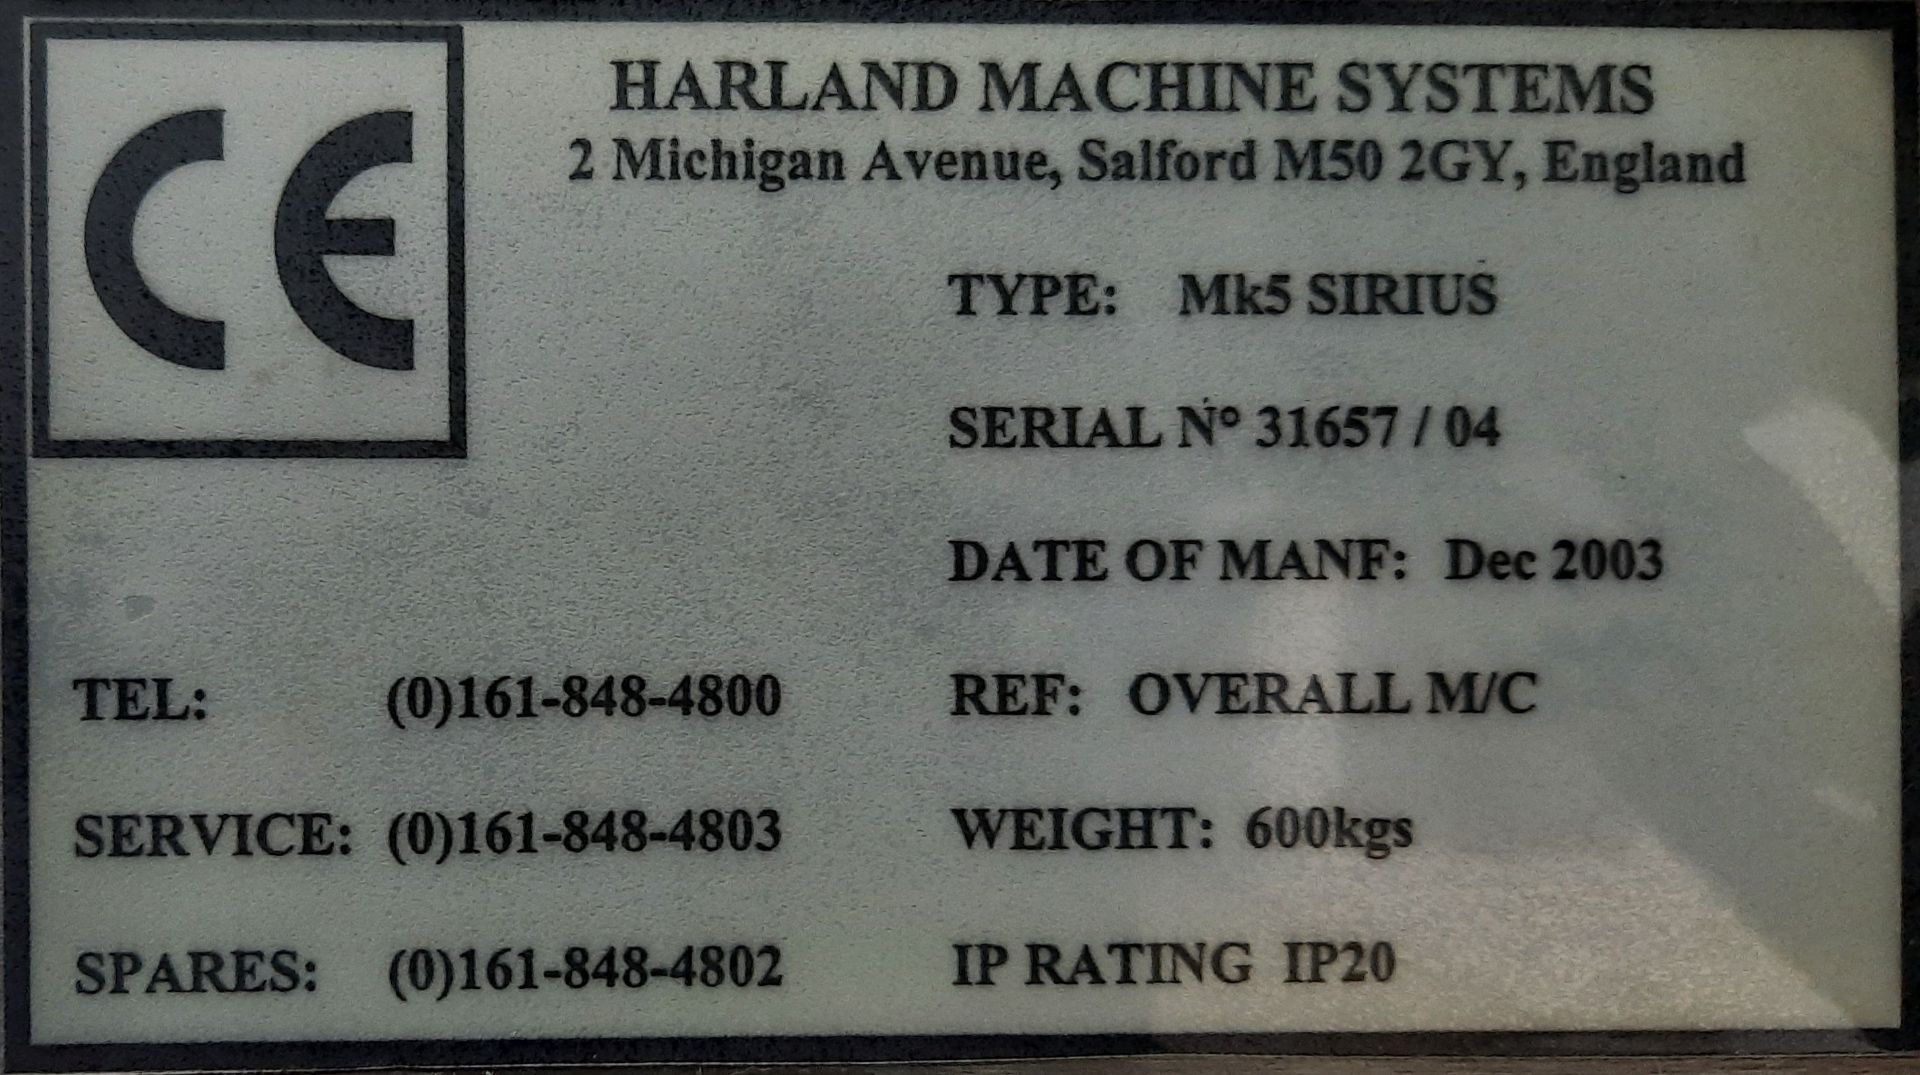 Harland Labeller MK 5 Sirius Automatic 2-Head Top Label Applicator - Image 7 of 7